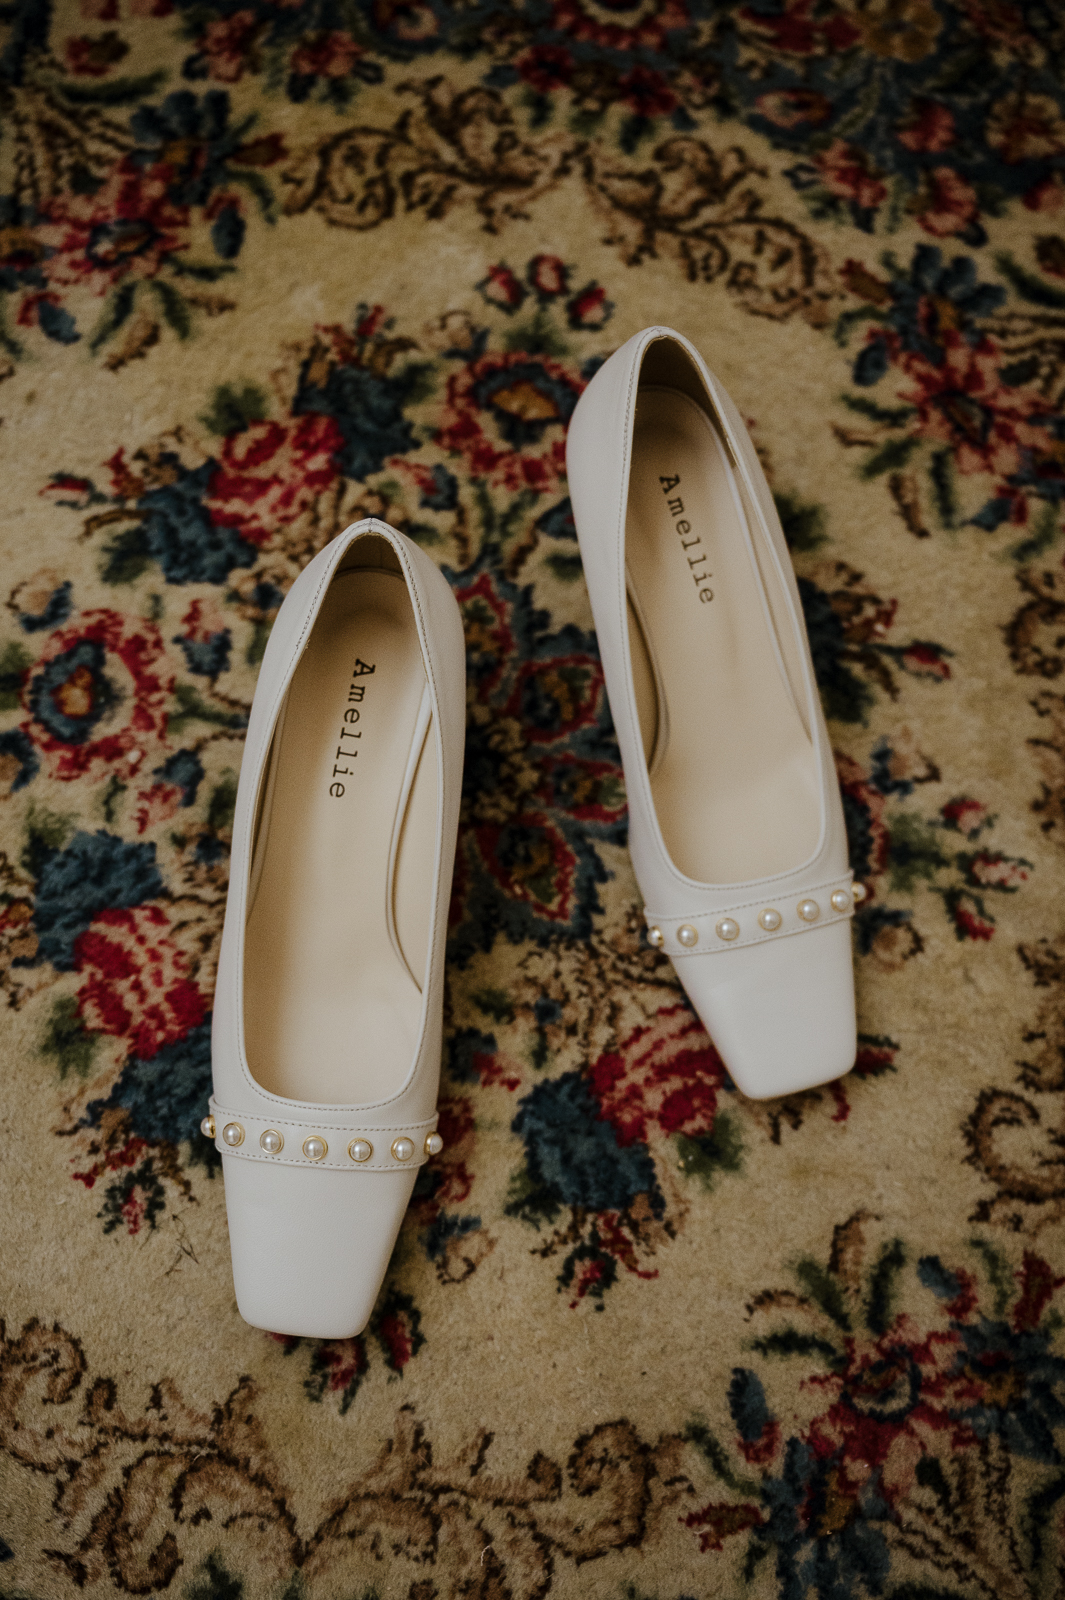 To avoid using wasteful wedding items one partner wears repurposed shoes